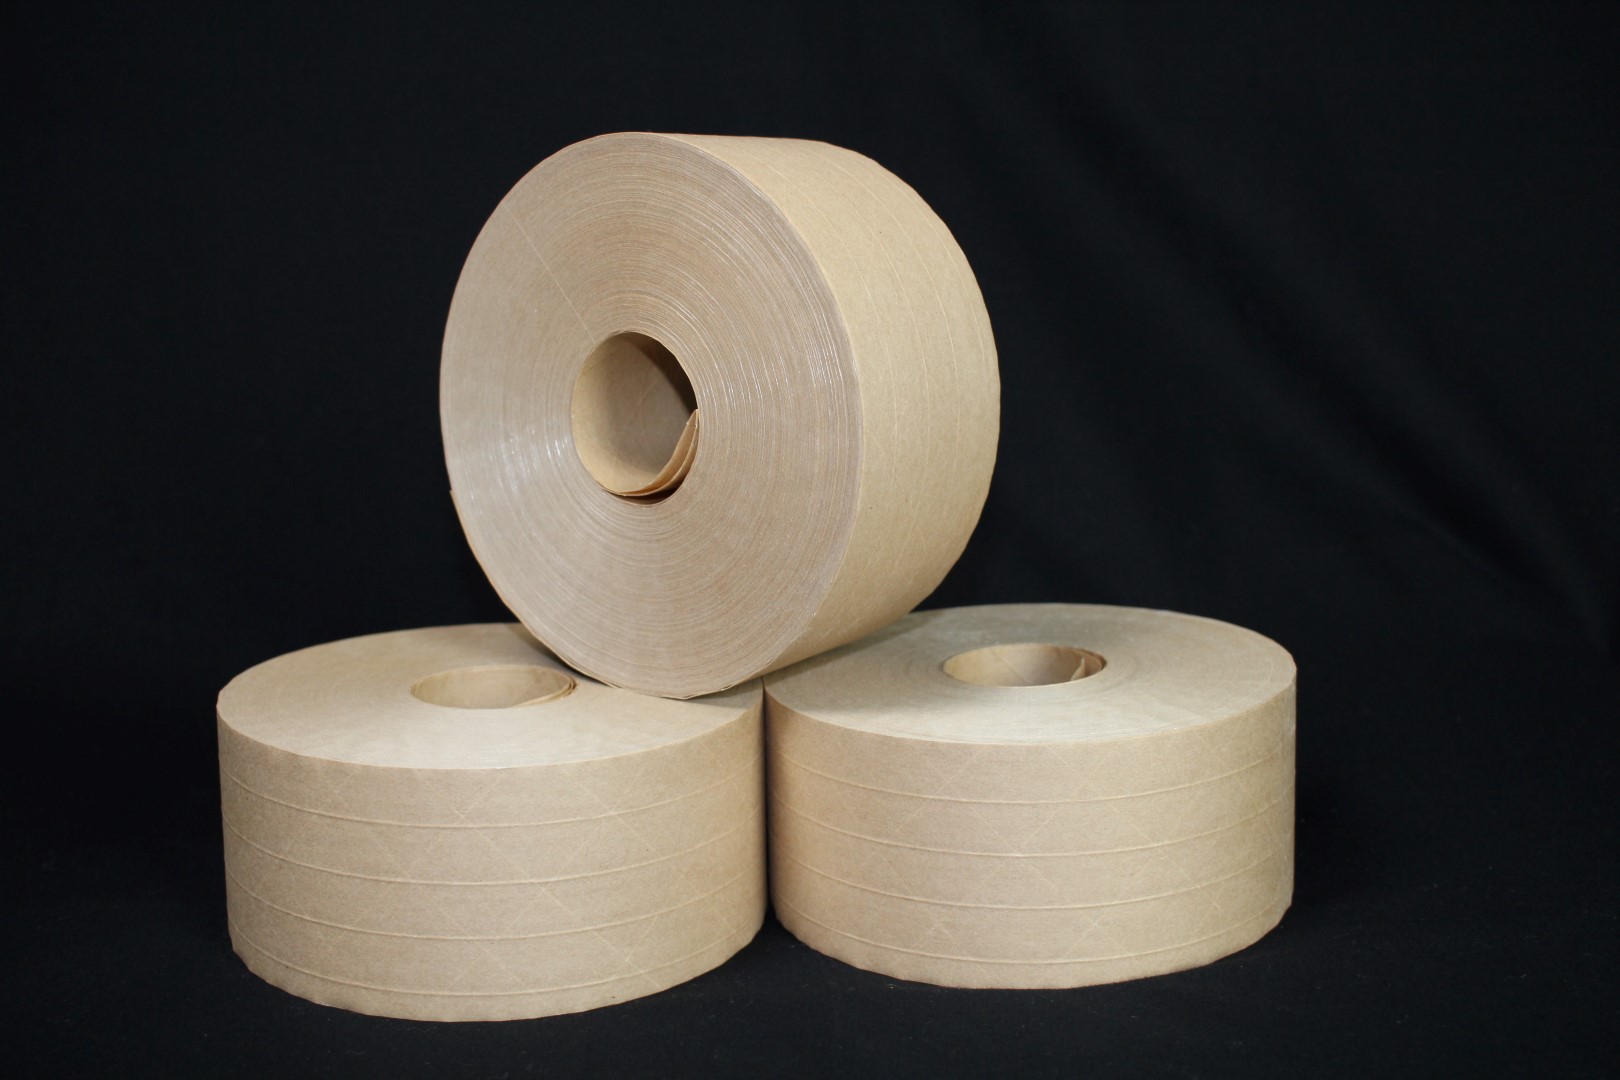 10 Rolls Reinforced Water Activated Gummed Tape 72mm x 450' Holland USA 